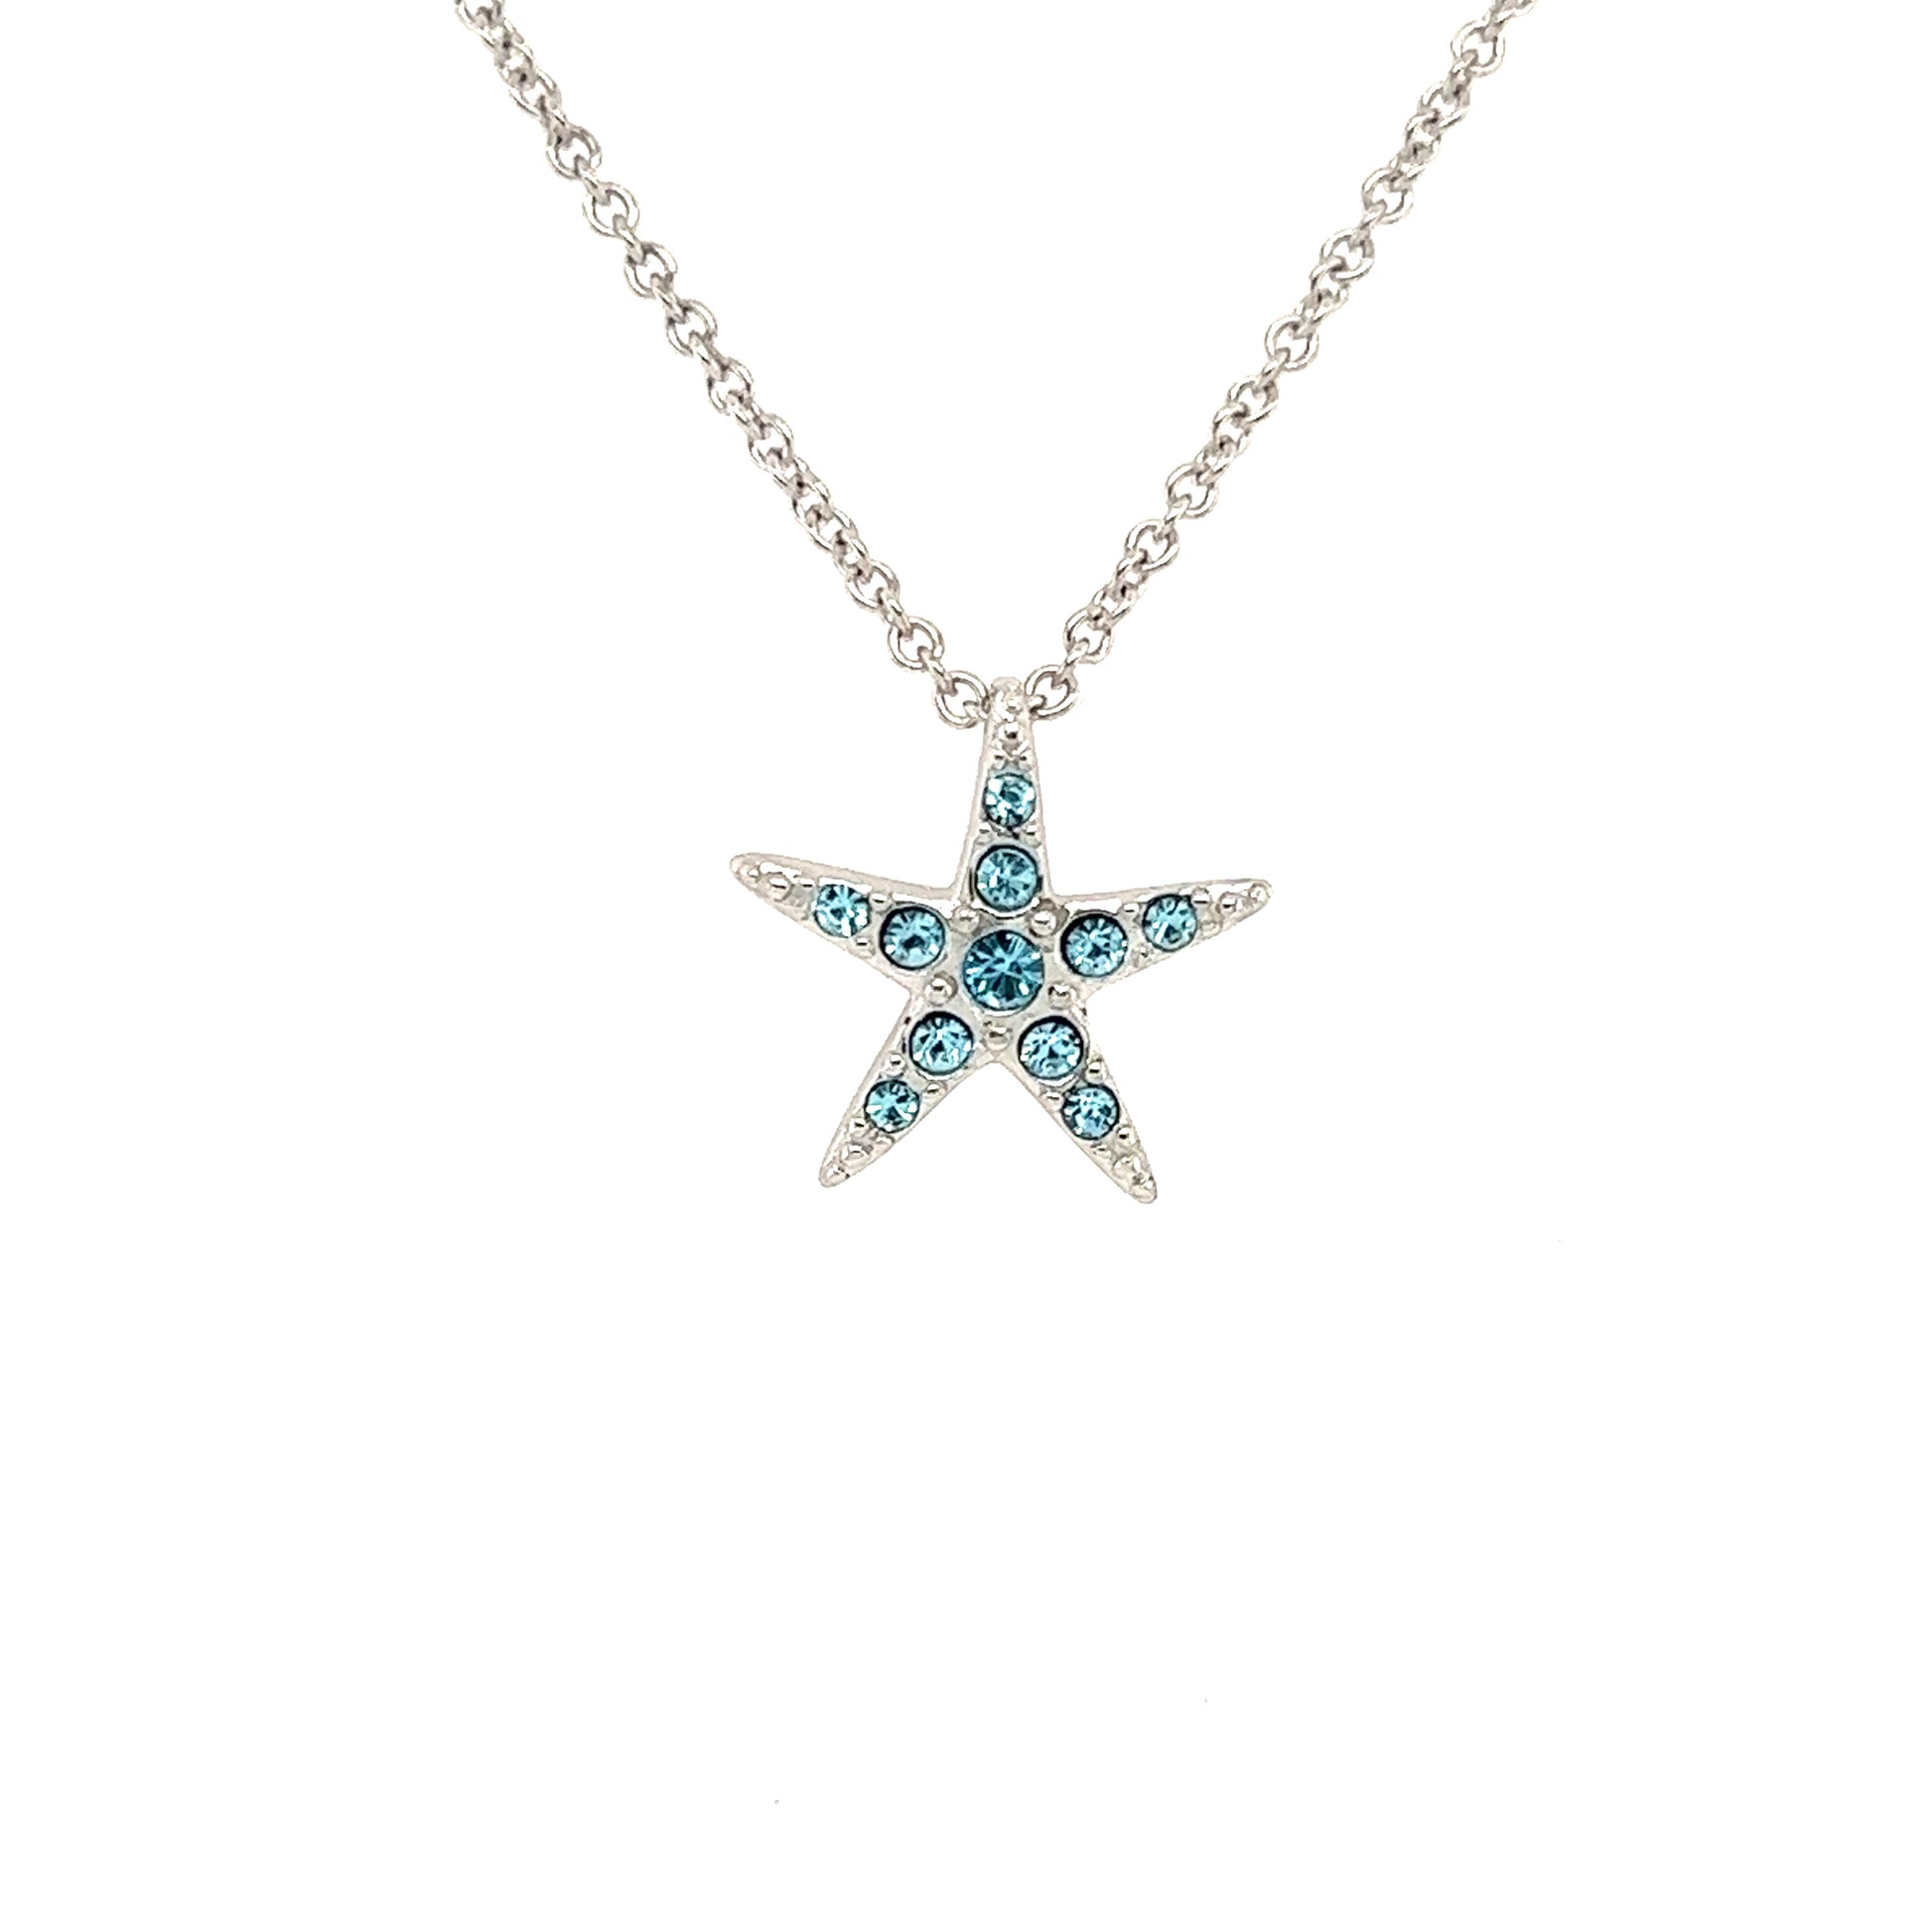 Small Starfish Necklace with Aqua Crystals in Sterling Silver Pendant View